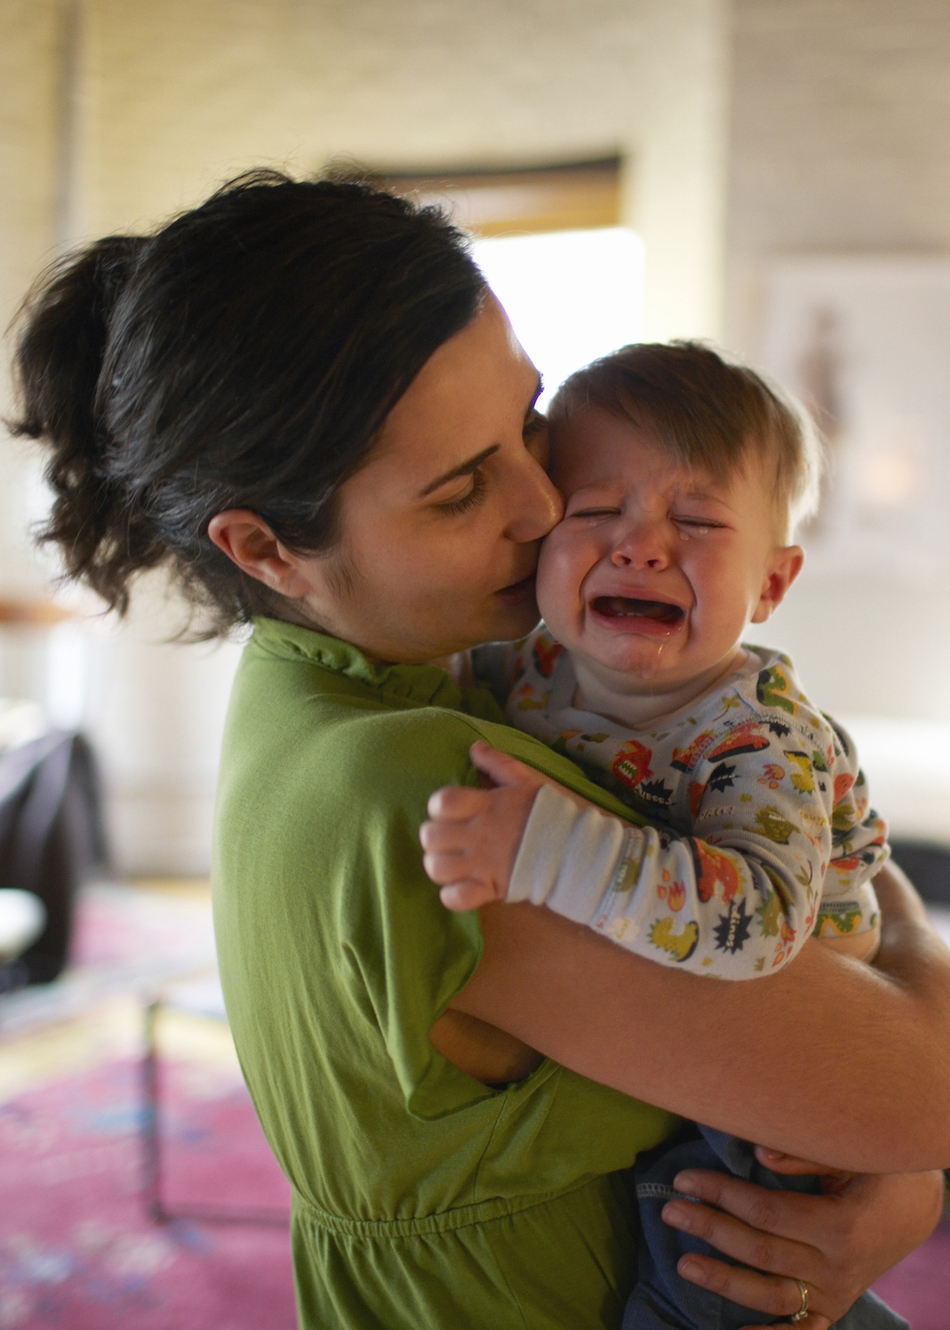 The Basics: Why is Your Child Crying?